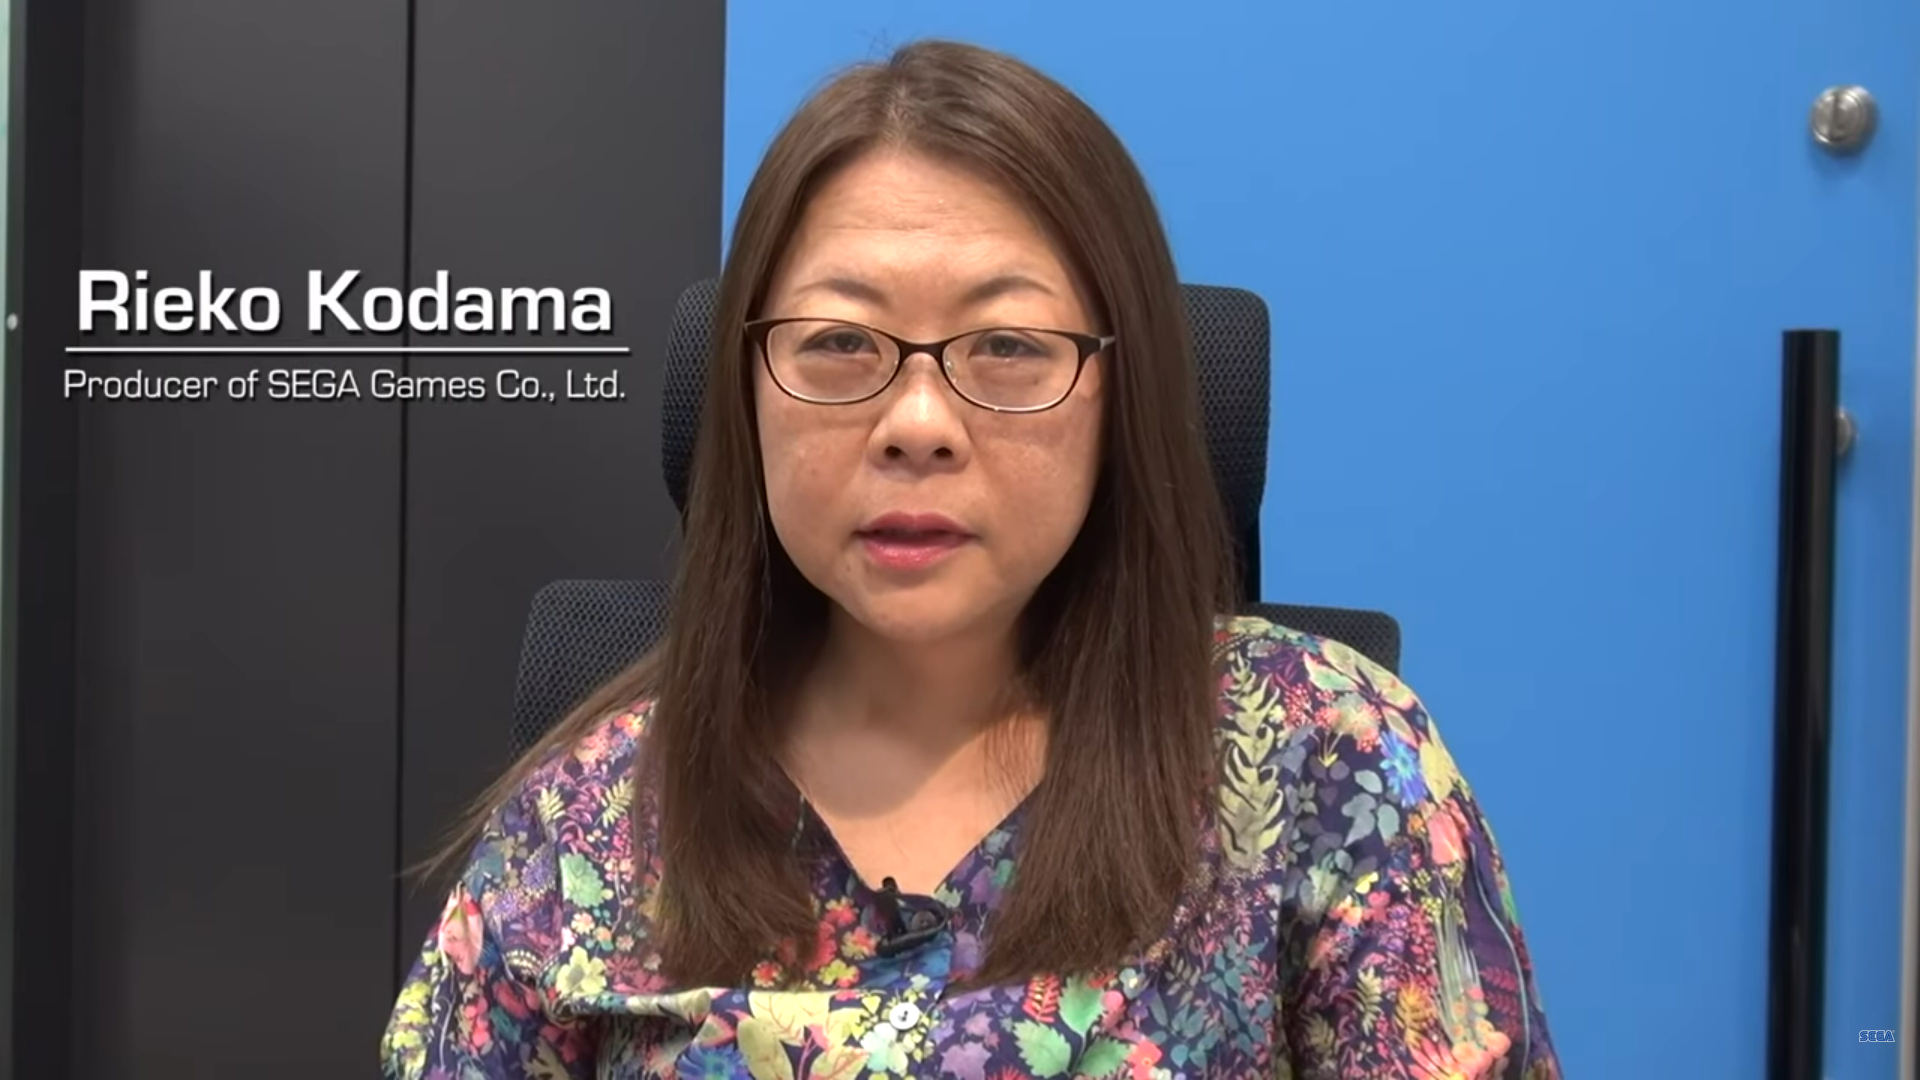 Rieko Kodama, Sega Developer Behind Some Of The Publisher’s Greatest Games, Has Died At 59